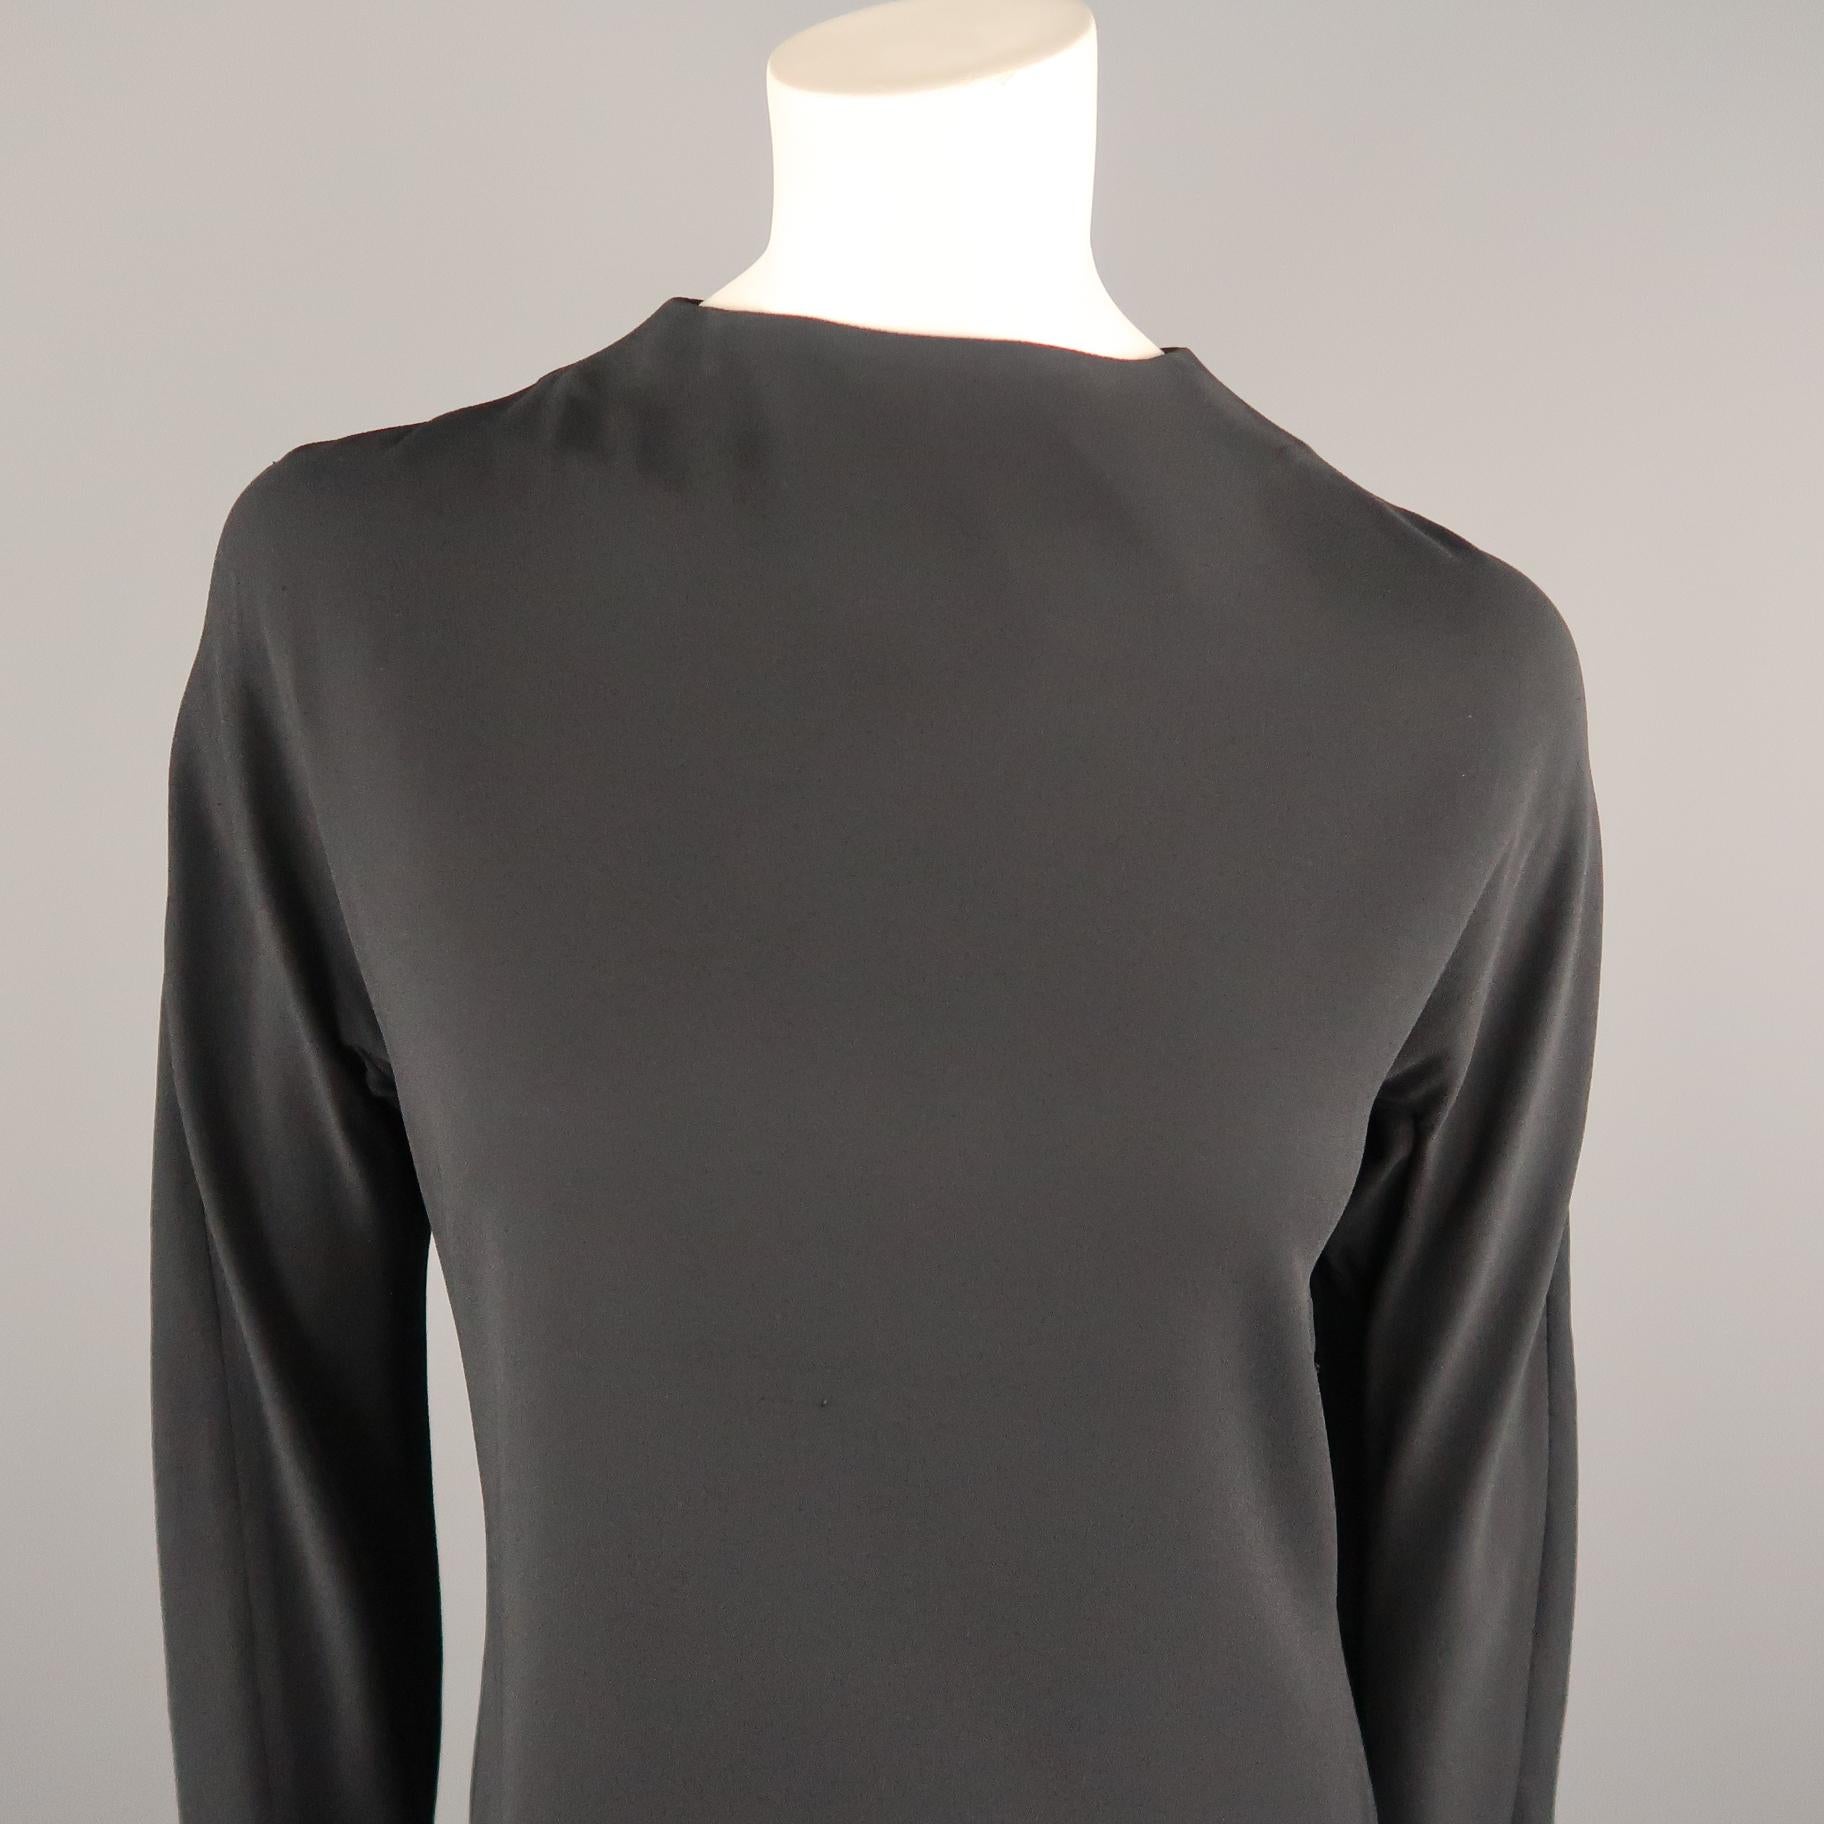 MARNI shift dress comes in black stretch crepe with a high neck, long sleeves, A line silhouette, and zip up back. Made in Portugal.
 
Good Pre-Owned Condition.
Marked: IT 40
 
Measurements:
 
Shoulder: 17 in.
Bust: 38 in.
Waist: 33 in.
Hip: 38